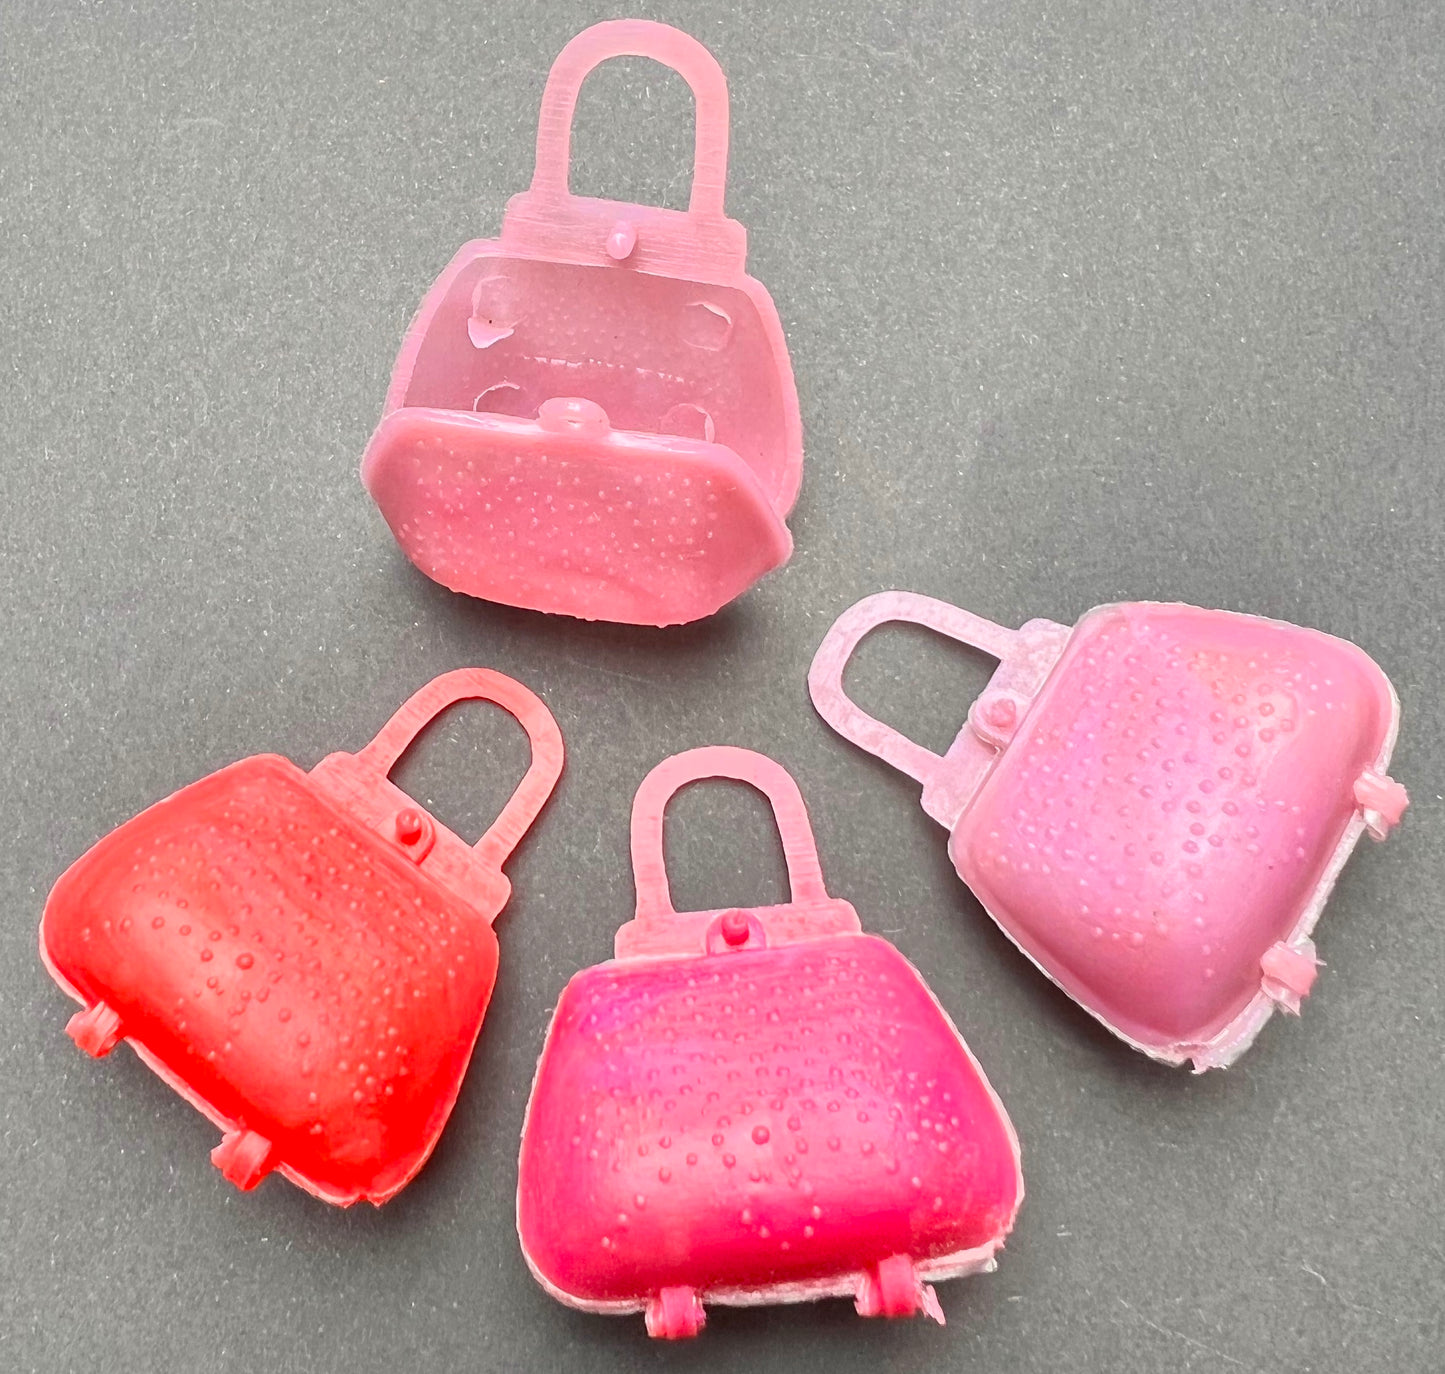 Vintage 1970s Bags for Barbies, Small Presents, or as a Tiny Tiny purse.